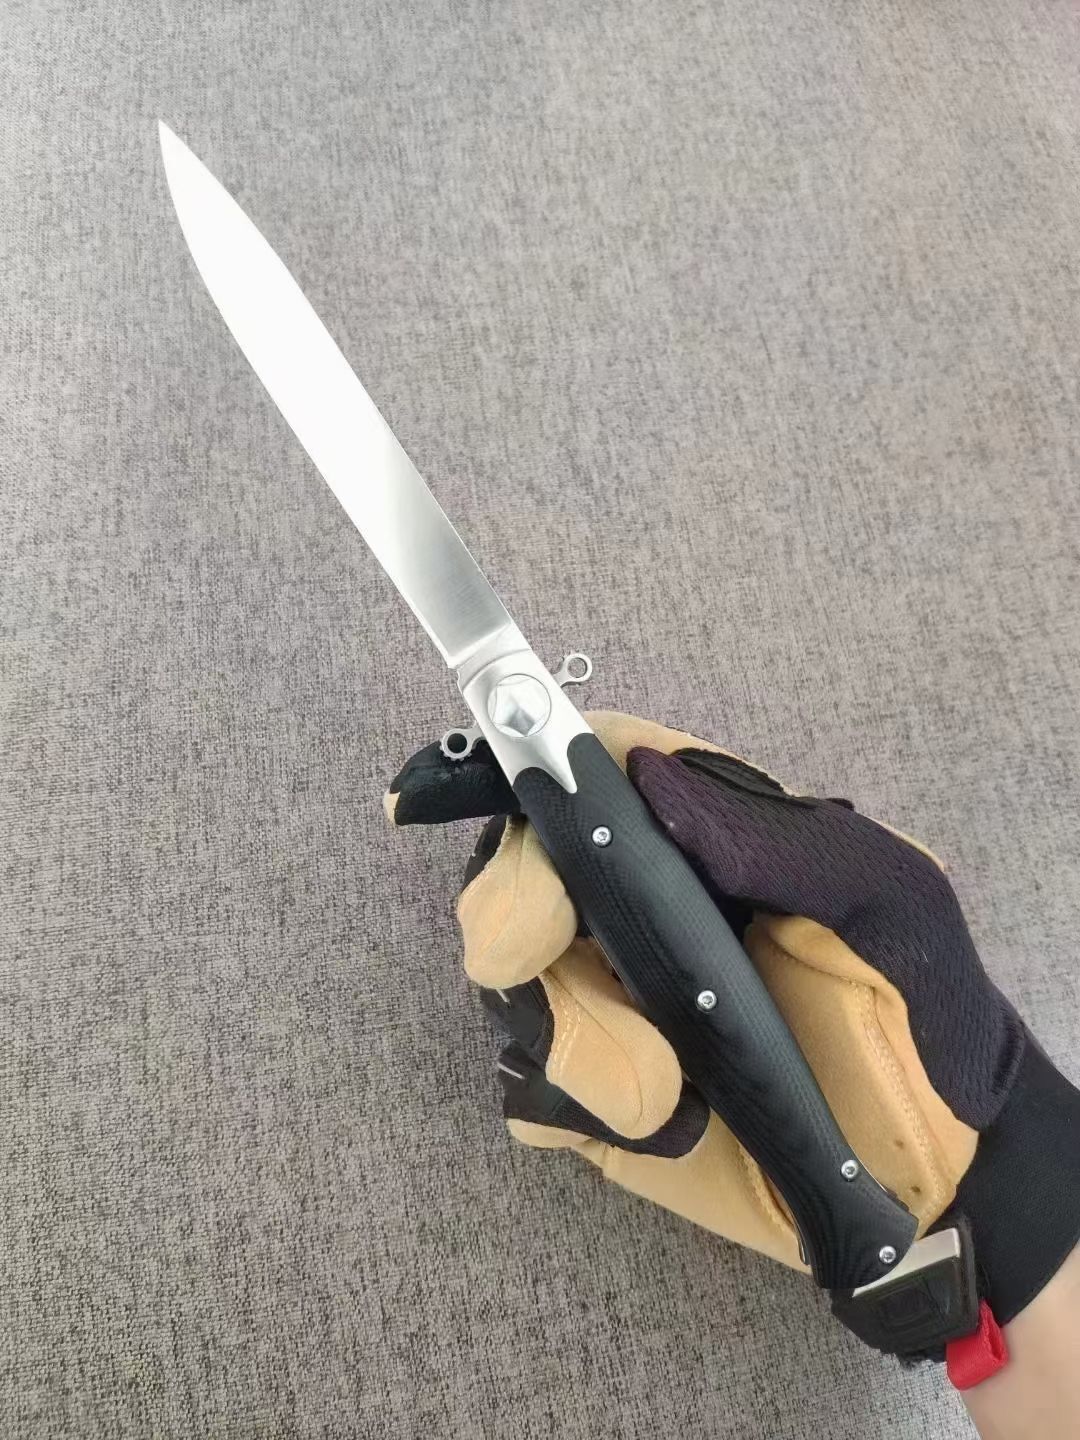 A knife for export to Russia